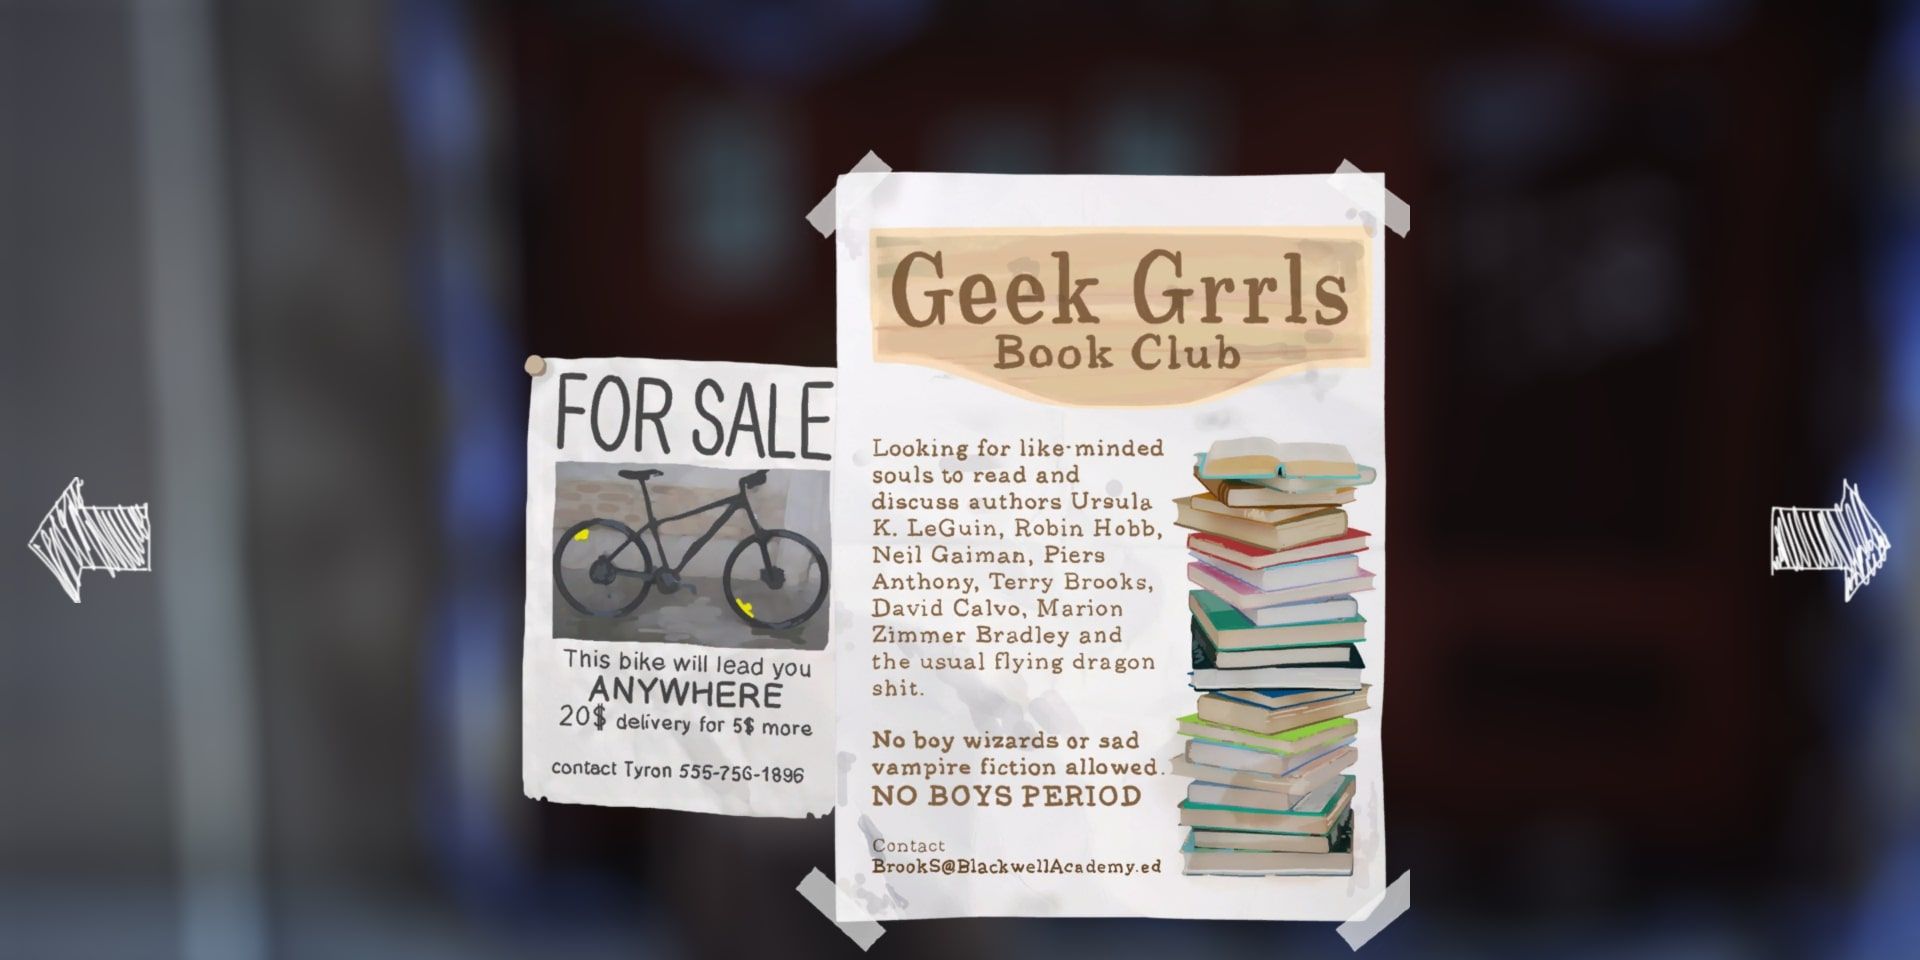 Geek Grrls Club flyer not allowing Harry Potter or Twilight fans to join